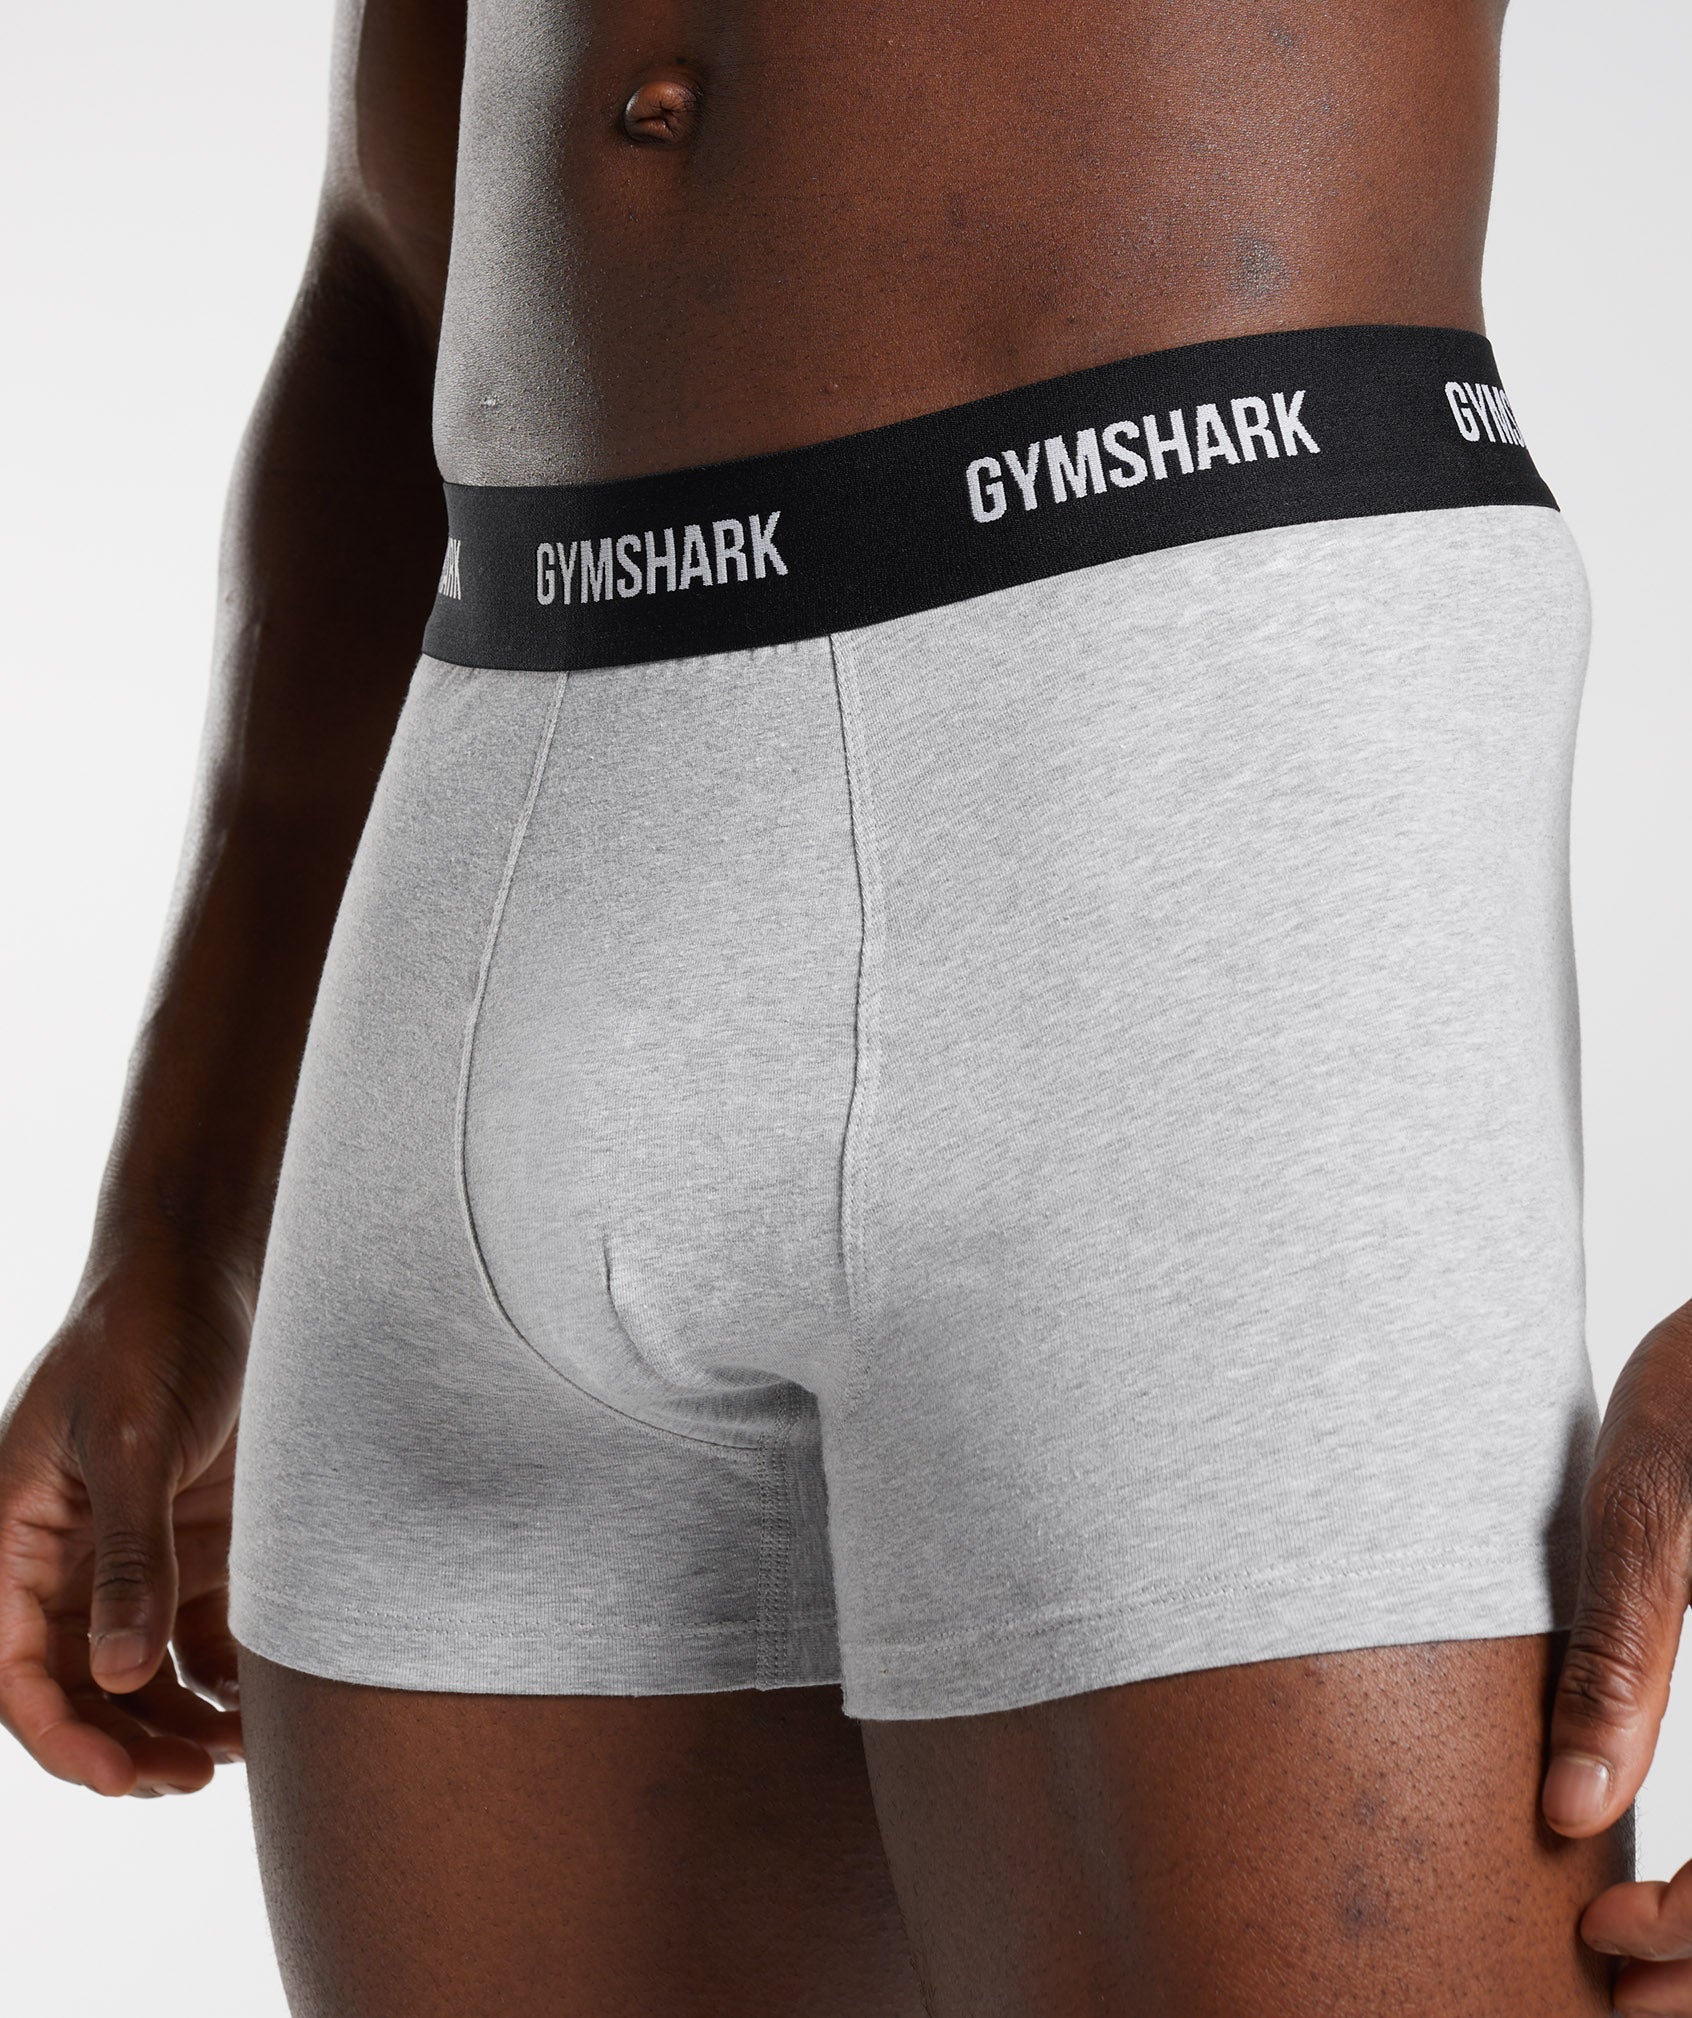 Gymshark on X: The GymShark Luxe underwear is now available! http